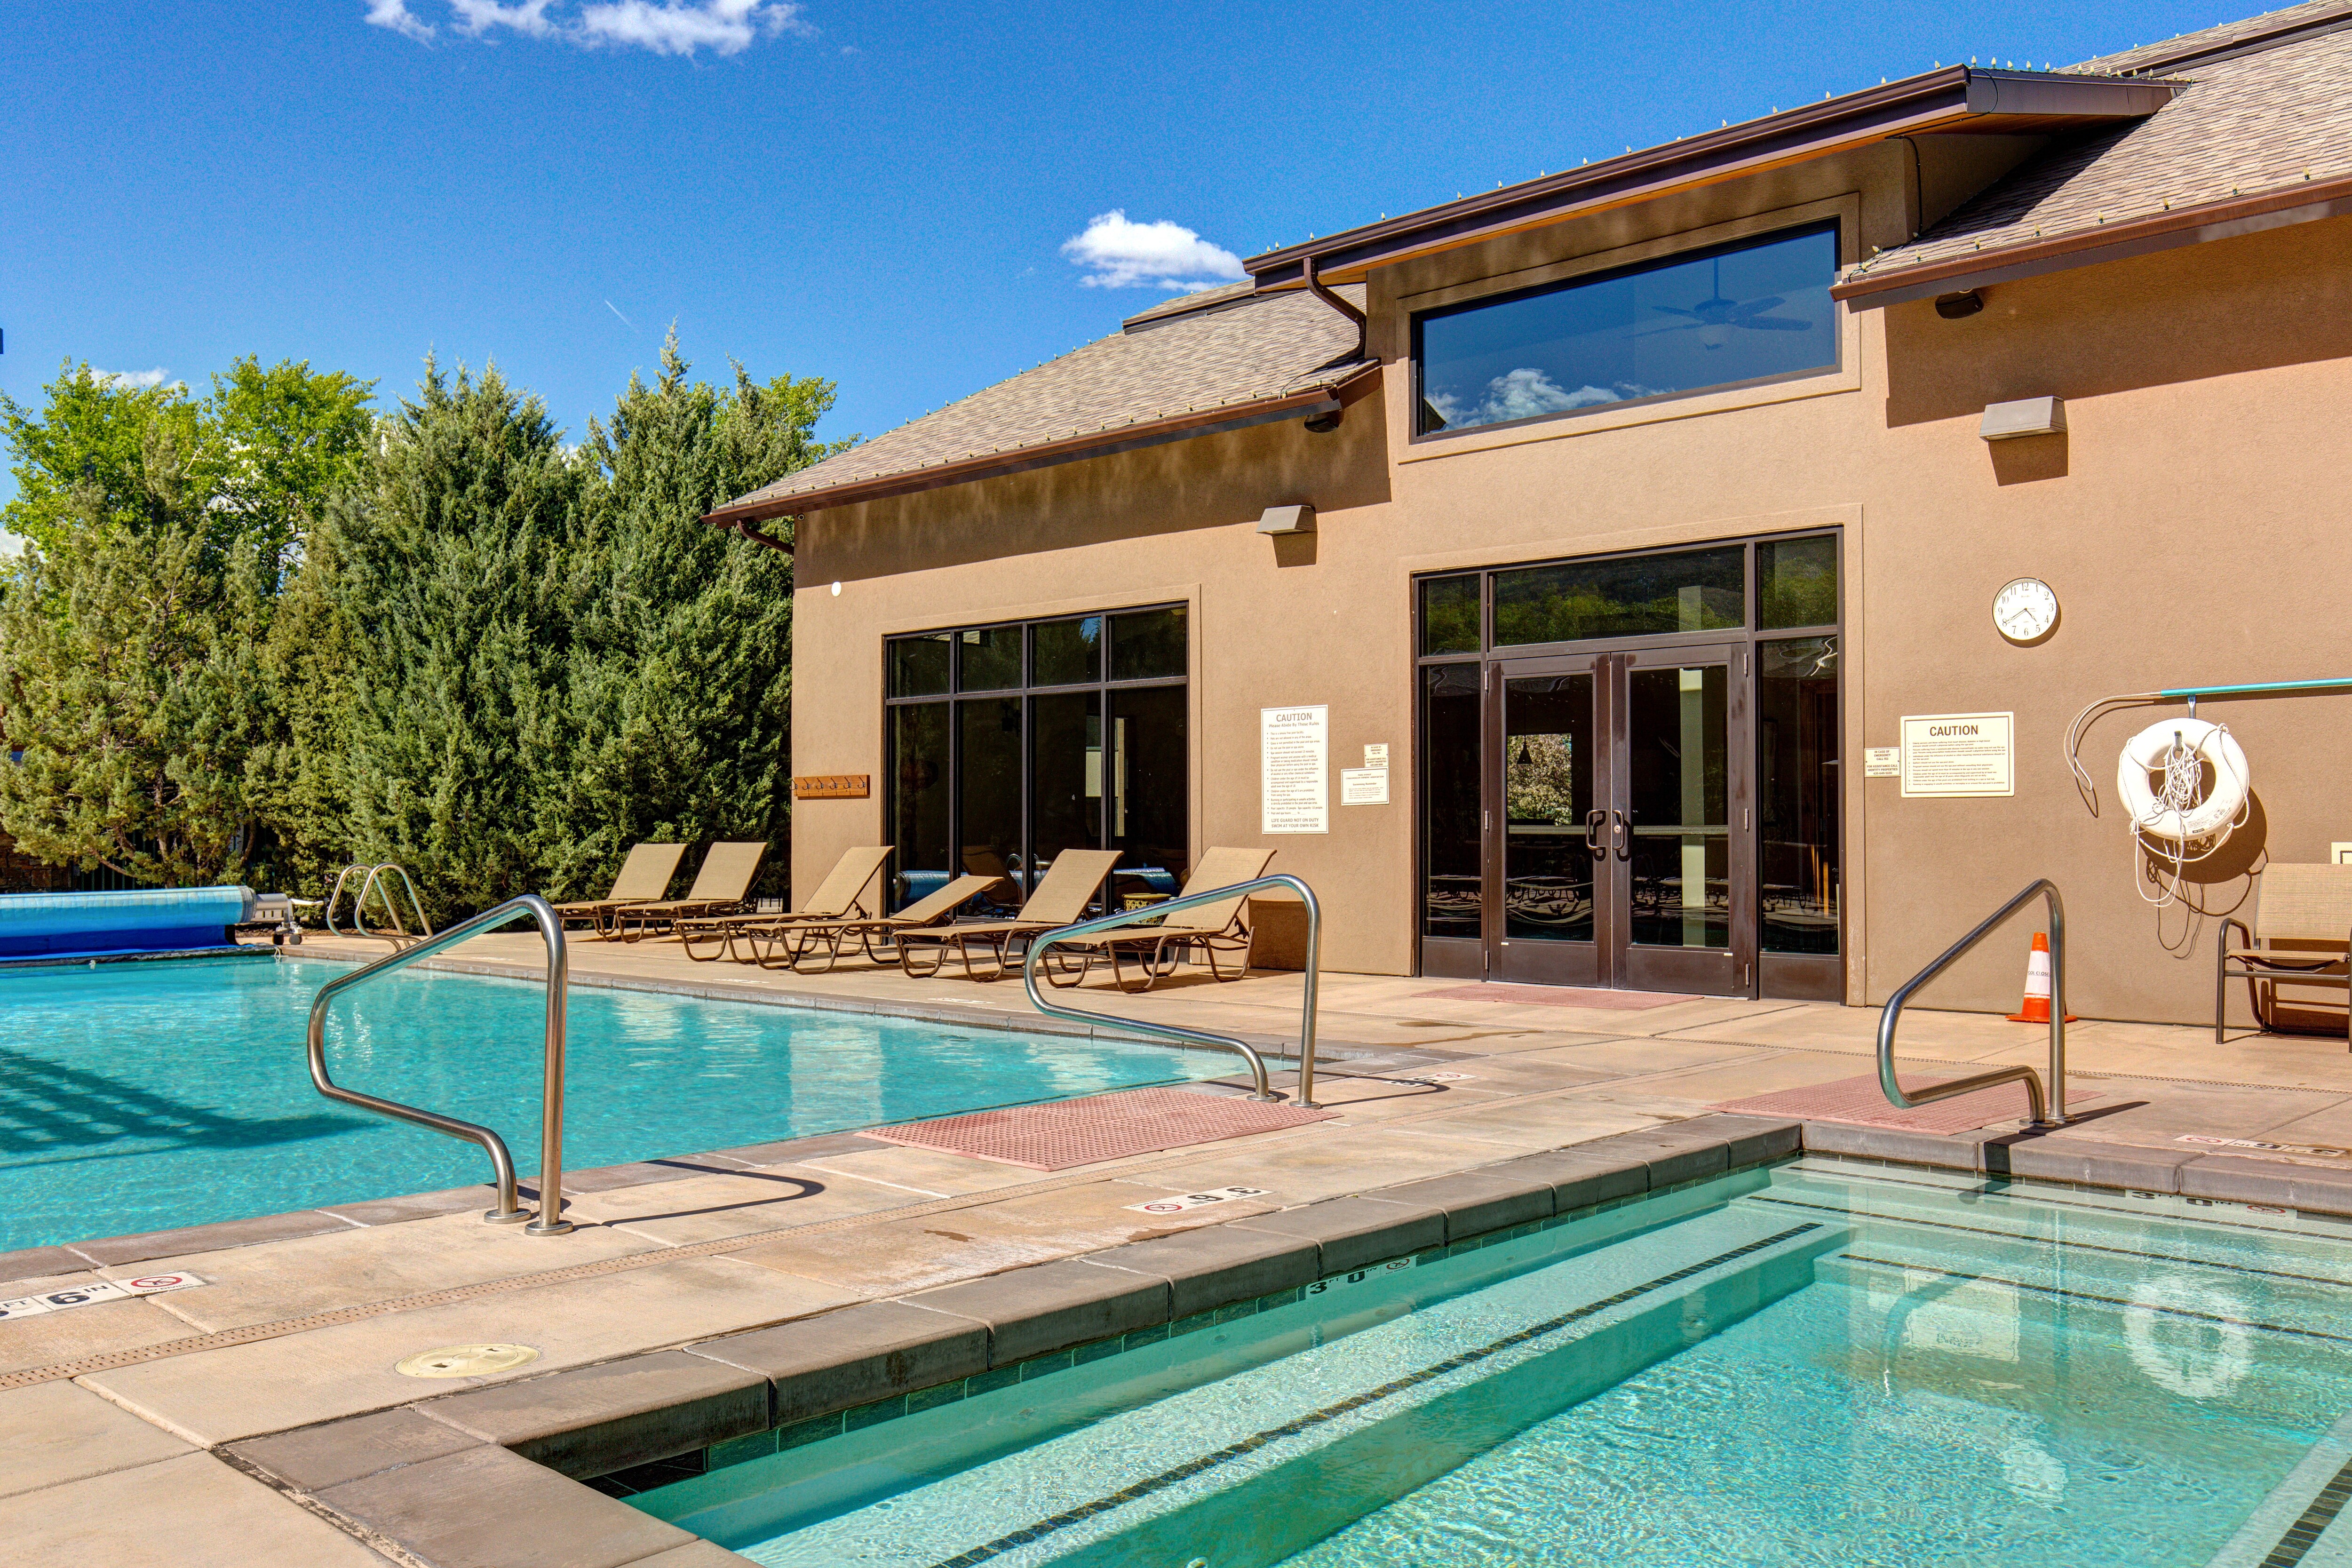 Community Clubhouse with a heated pool and two hot tubs